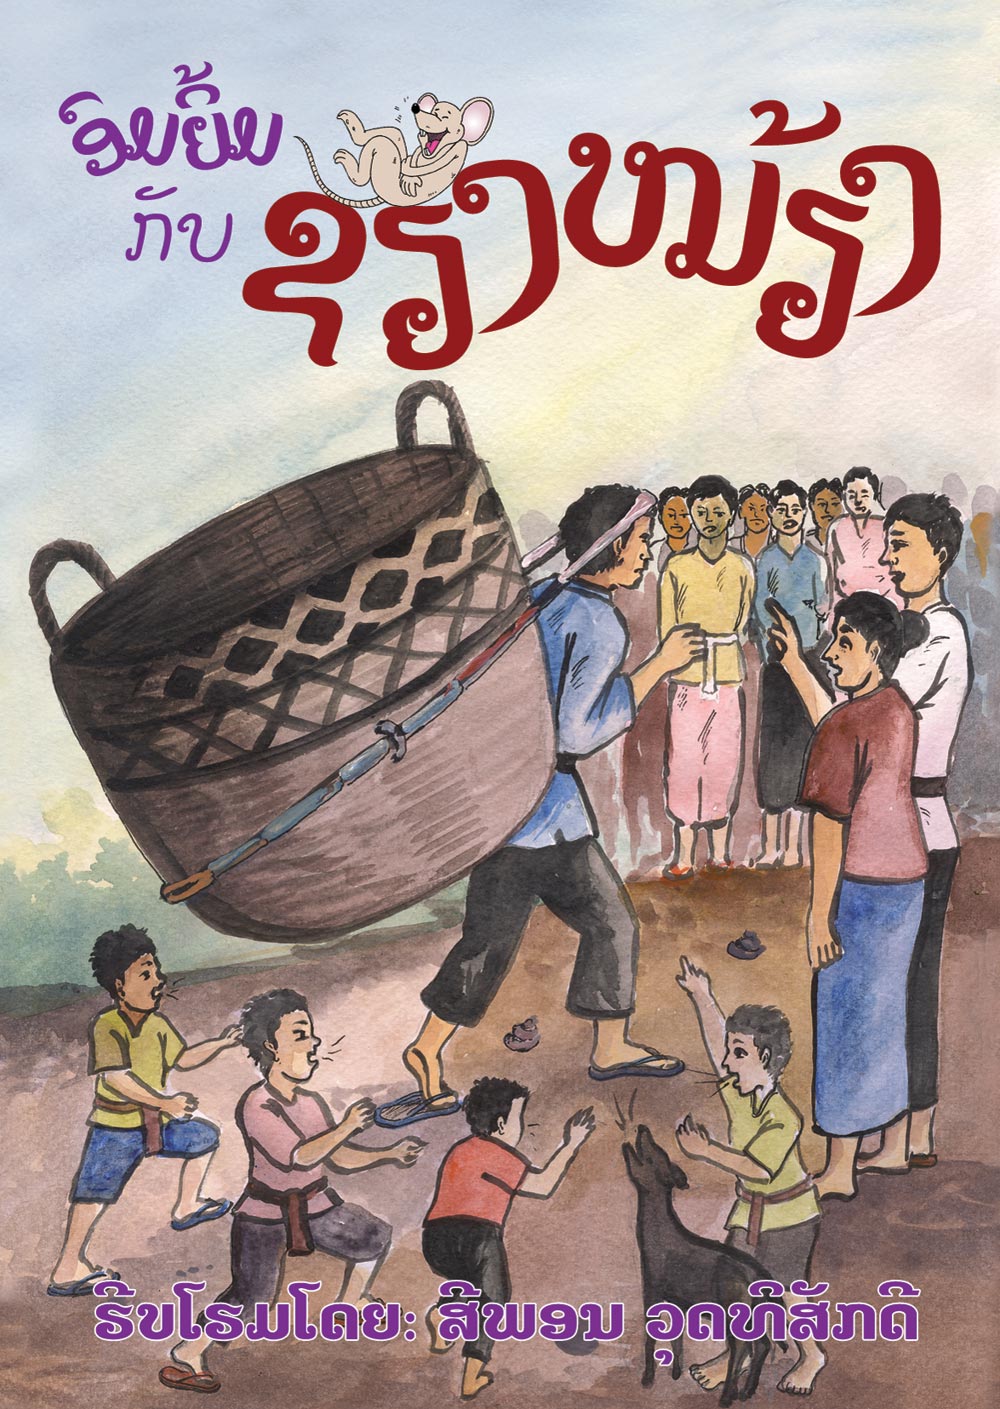 Xieng Mieng stories large book cover, published in Lao language